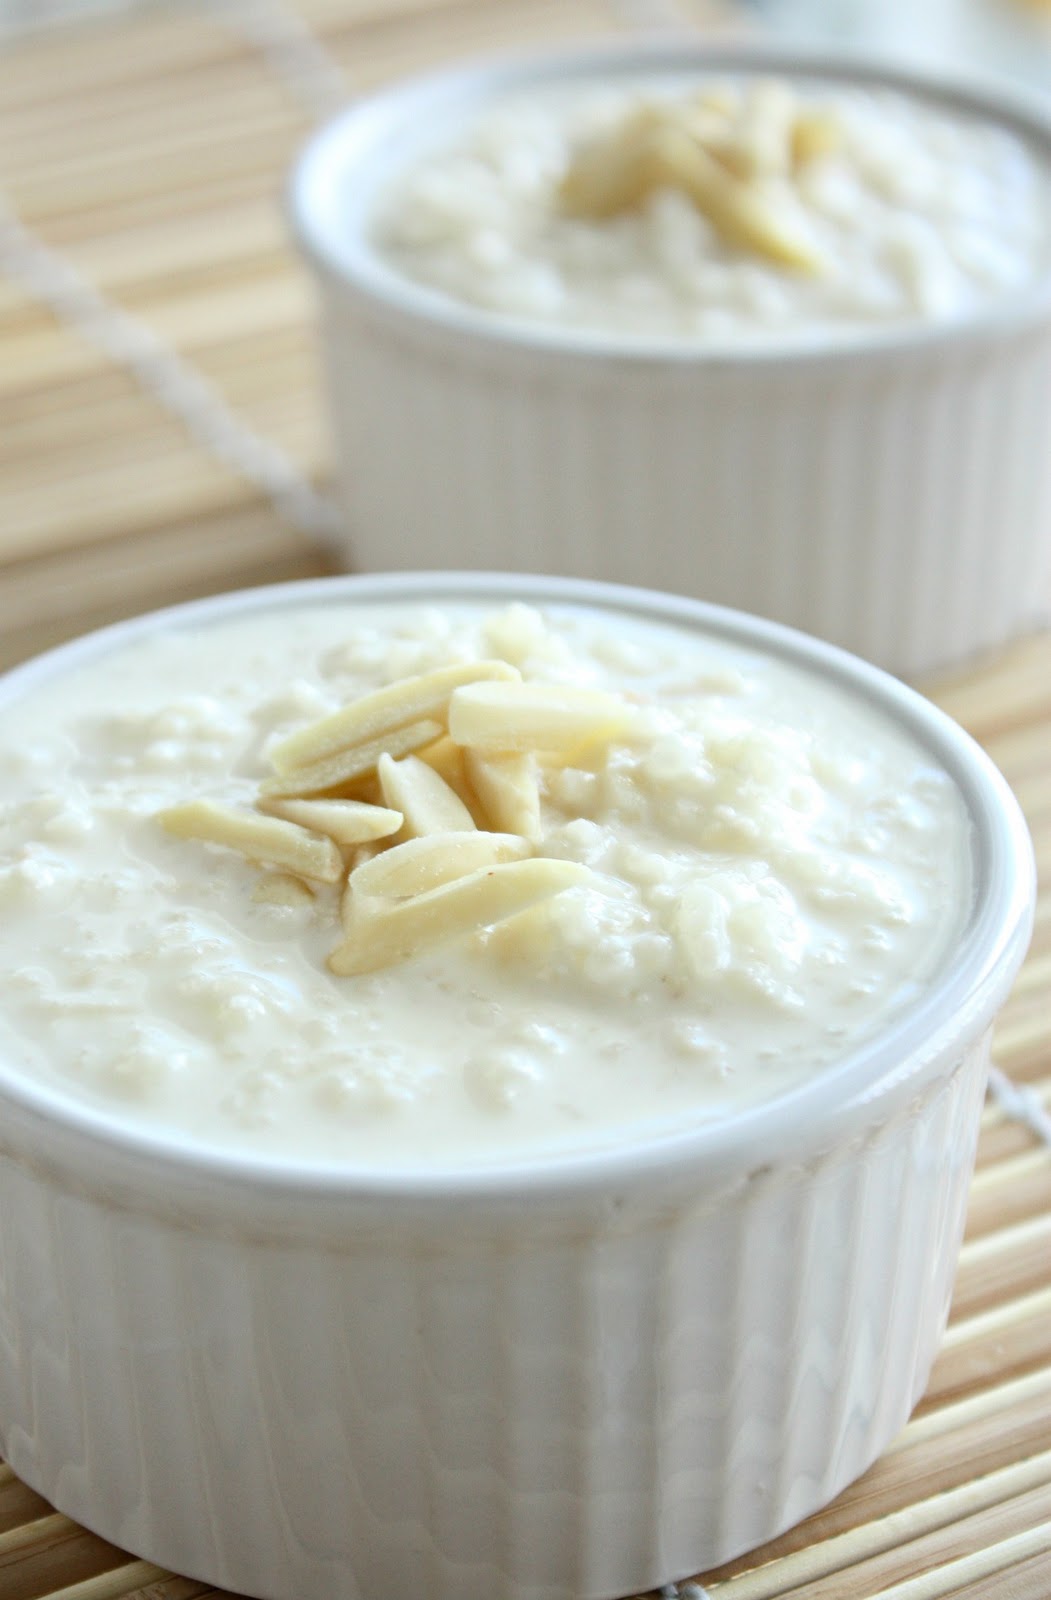 Our Eyes Eat First: Kheer - Indian Rice Pudding